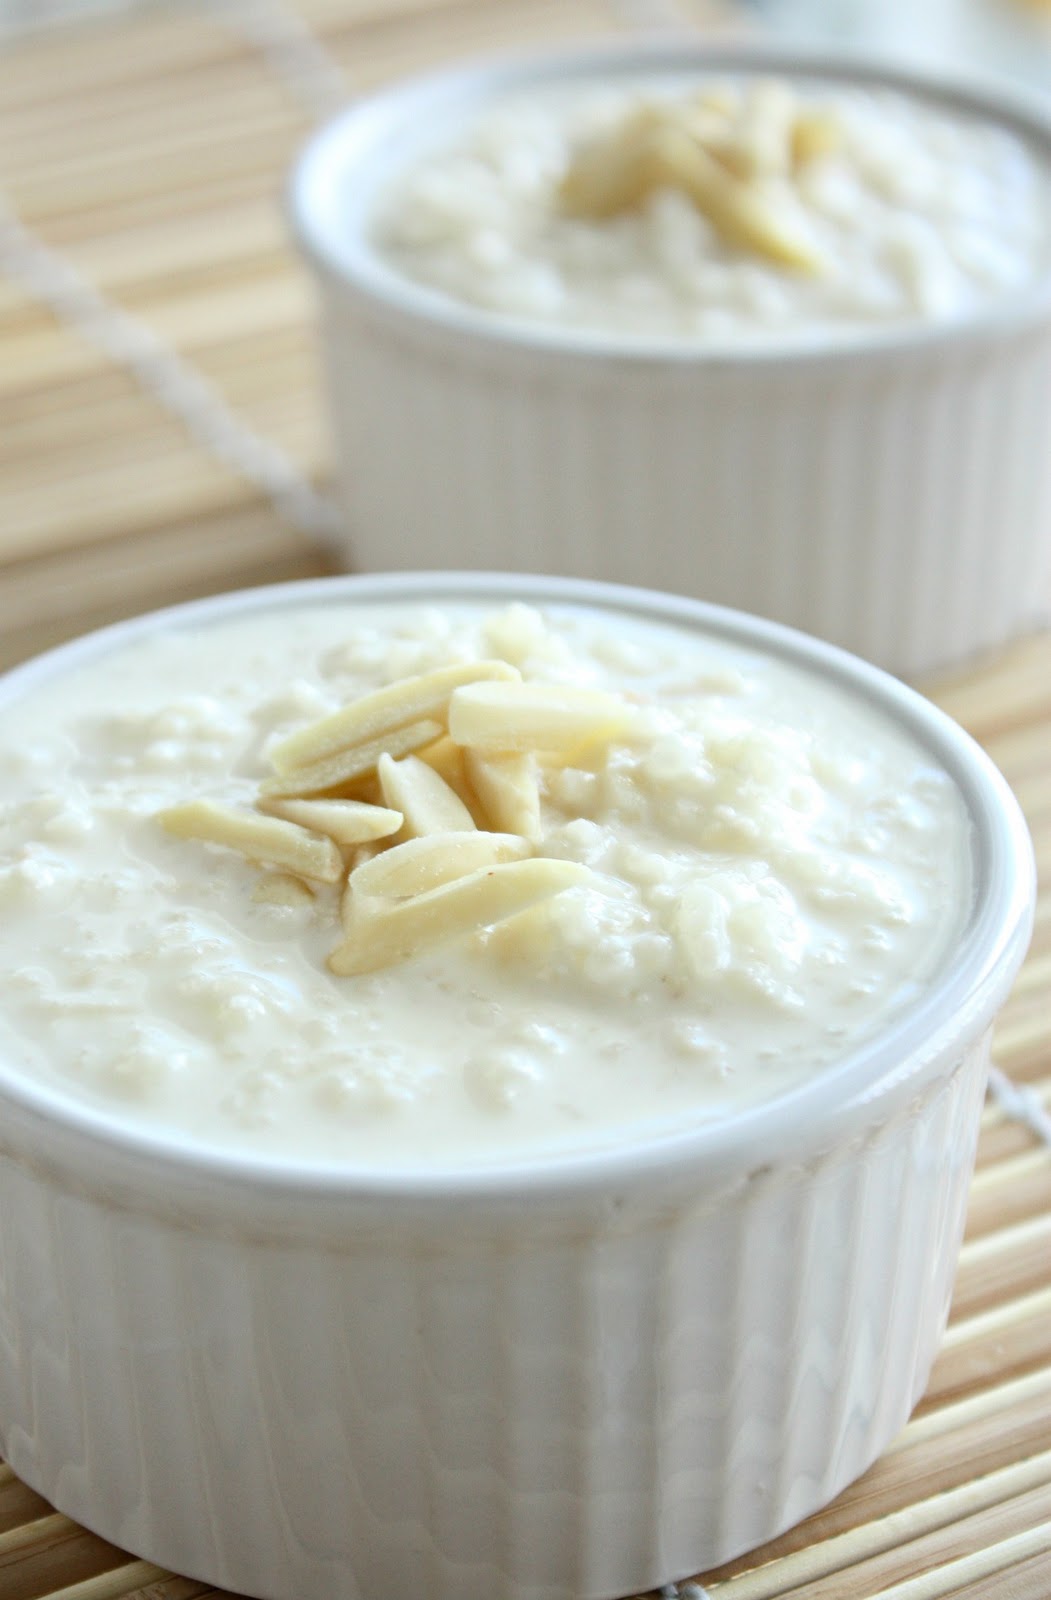 Our Eyes Eat First: Kheer - Indian Rice Pudding